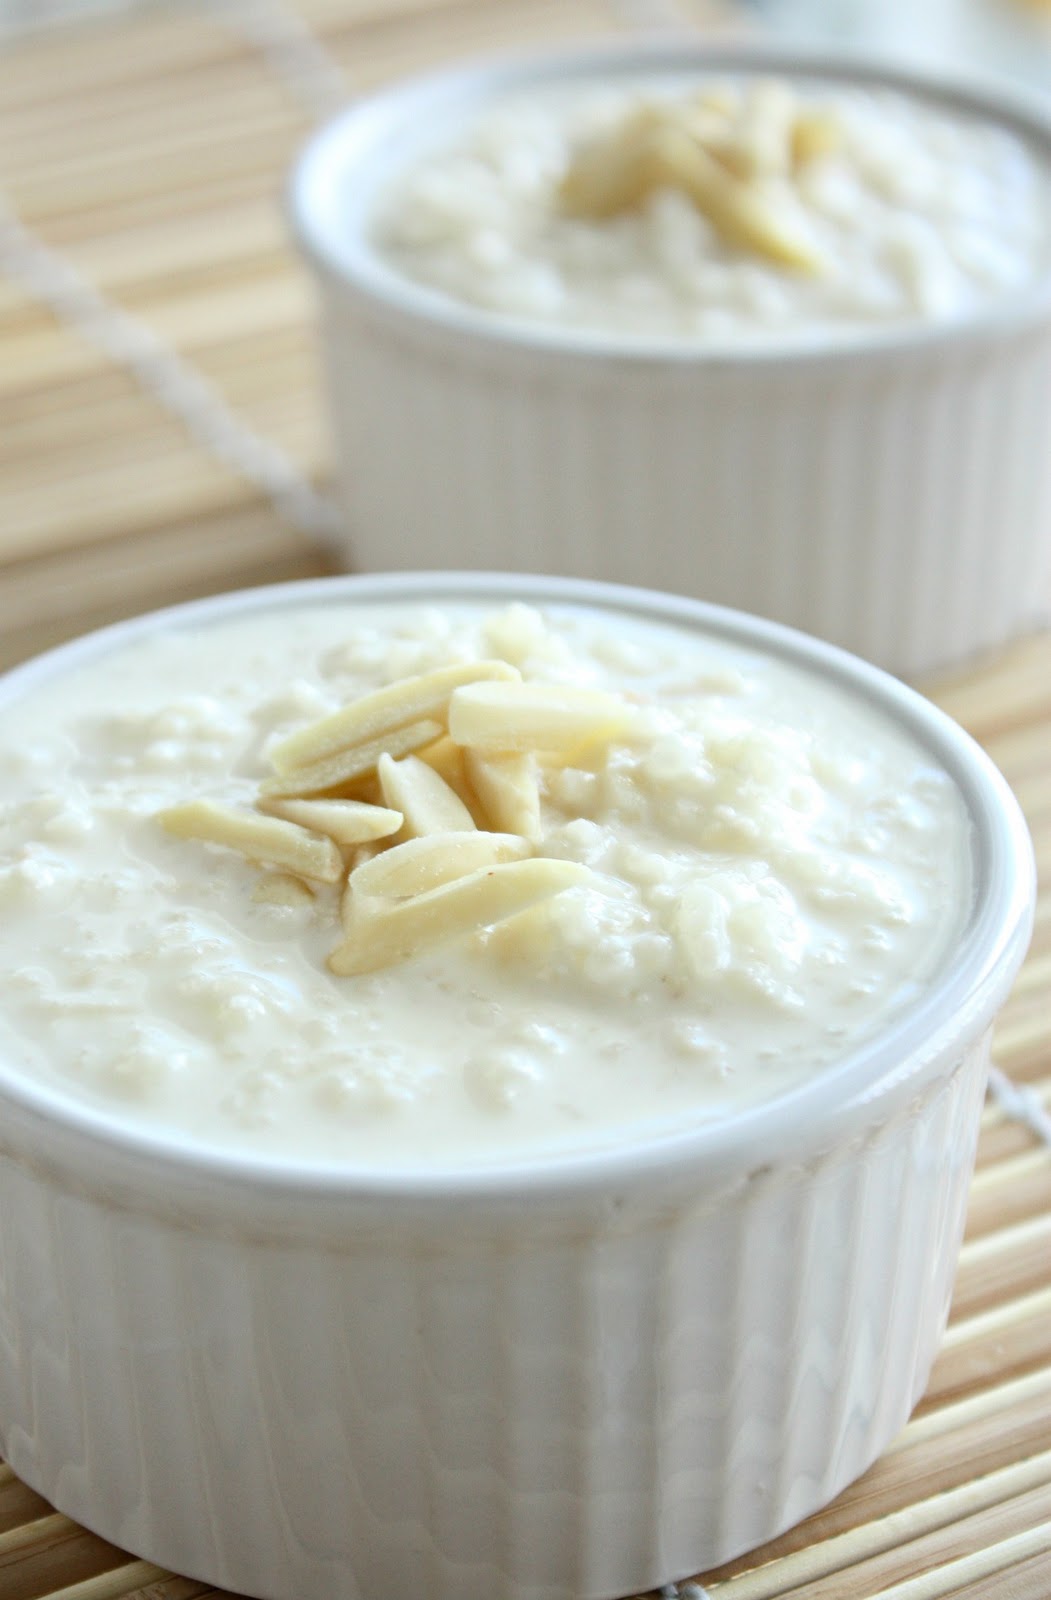 Our Eyes Eat First: Kheer - Indian Rice Pudding